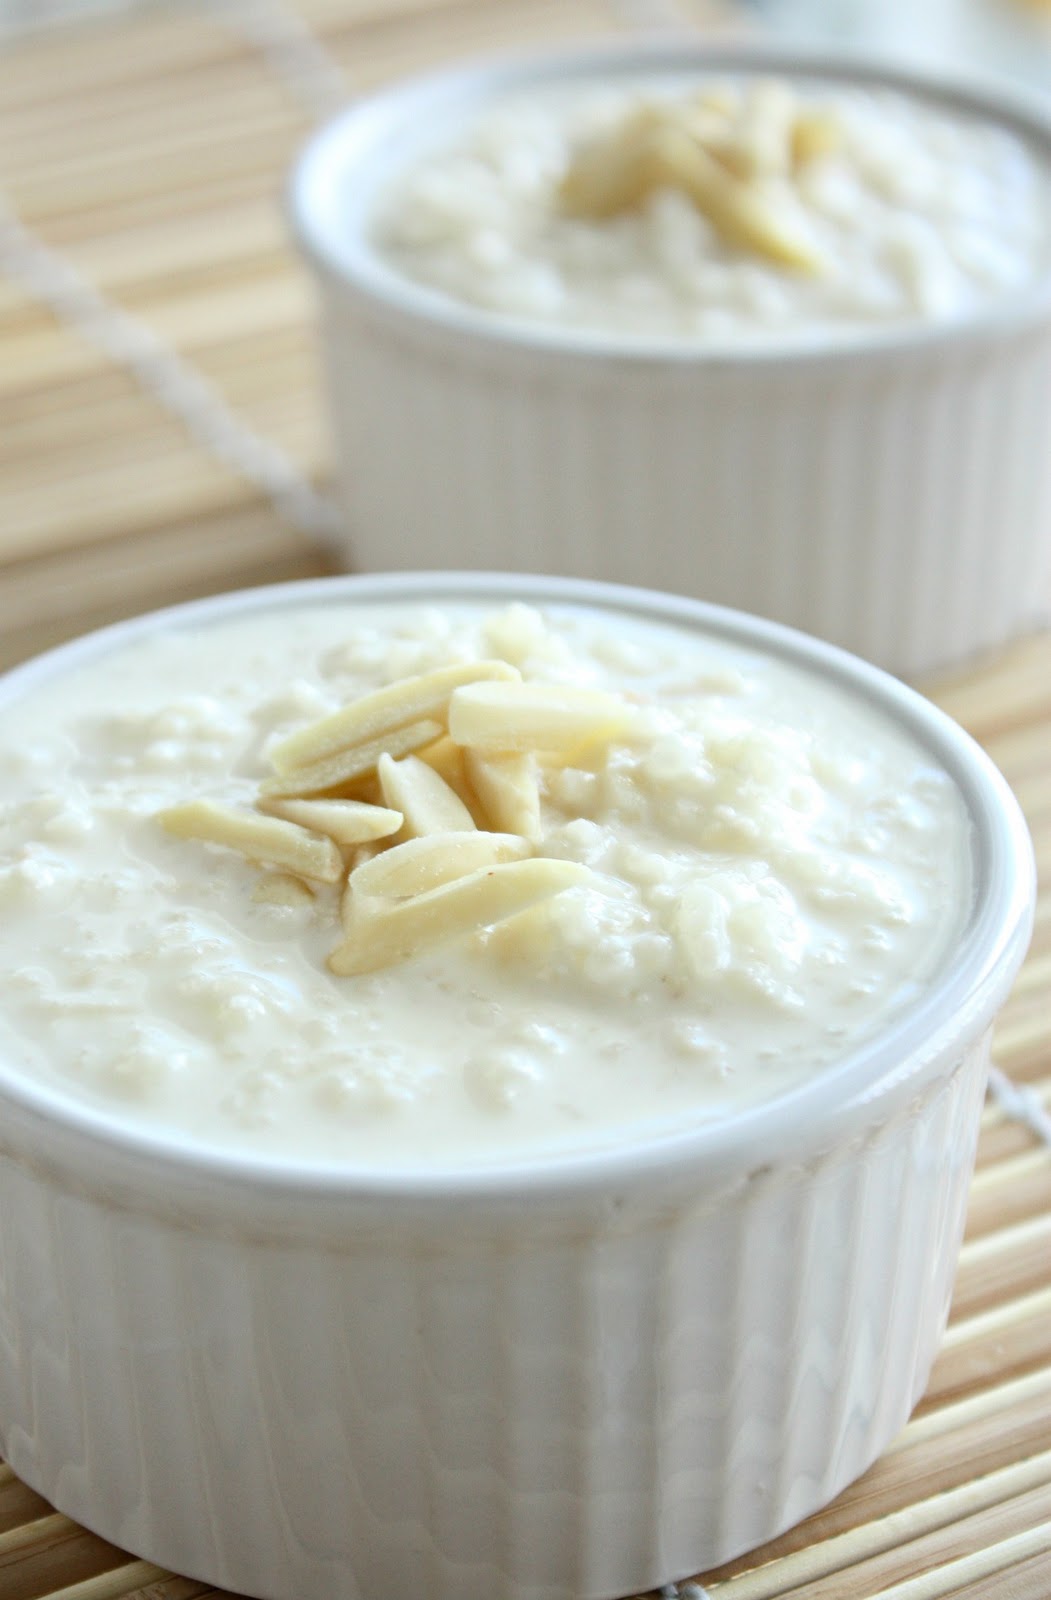 Our Eyes Eat First: Kheer - Indian Rice Pudding